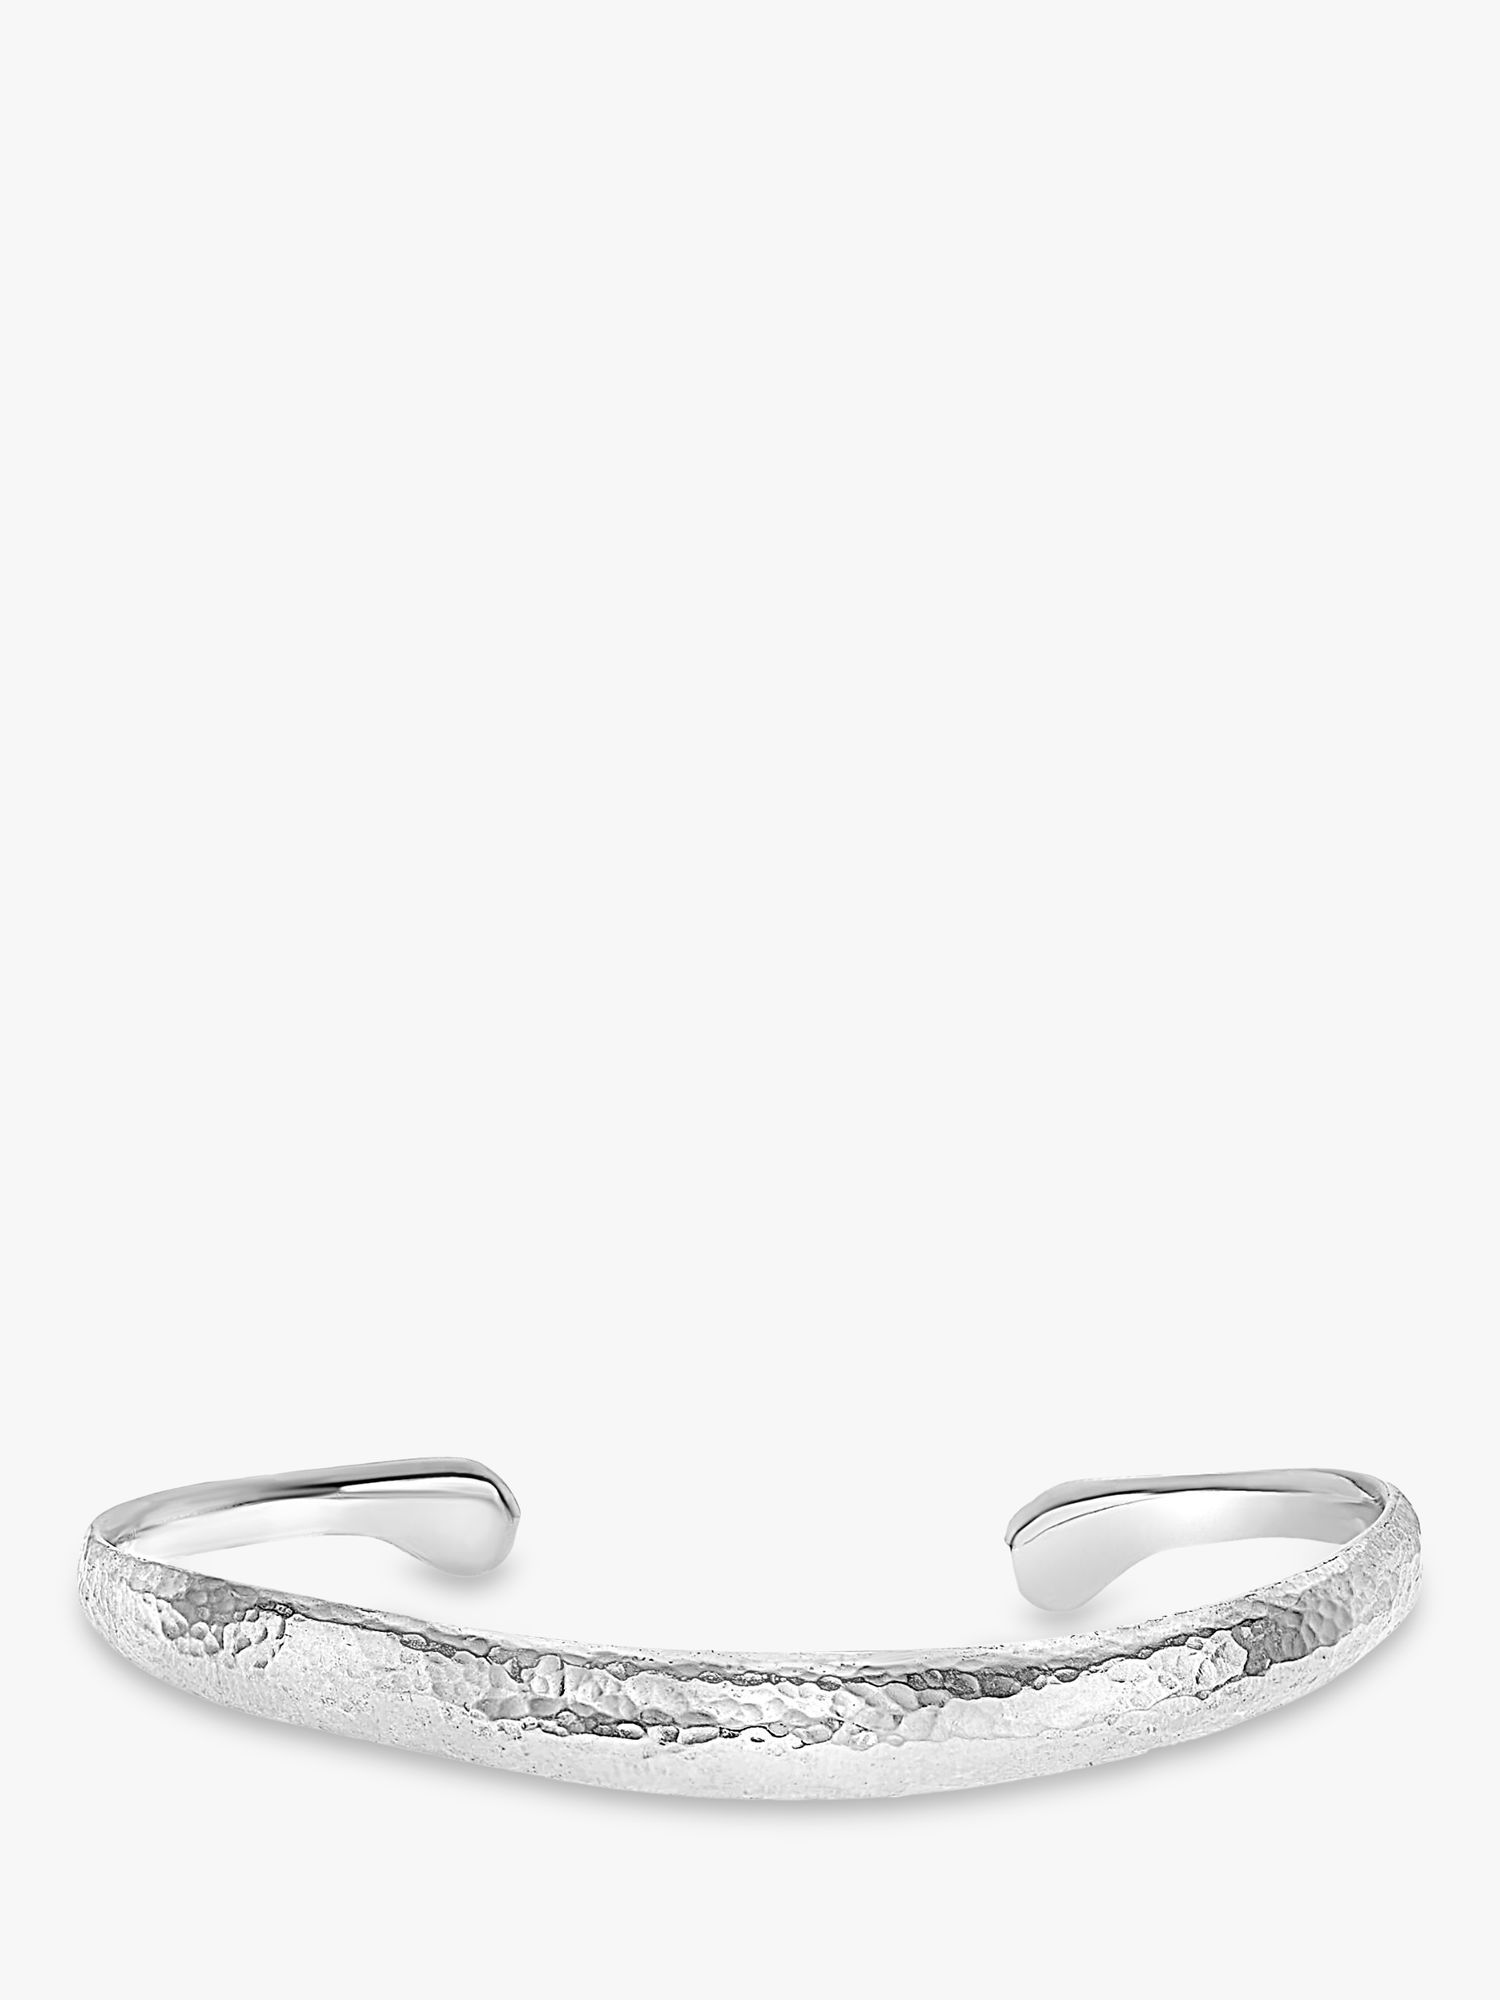 Buy Dower & Hall Men's Sterling Silver Curved Torque Bangle, Silver Online at johnlewis.com